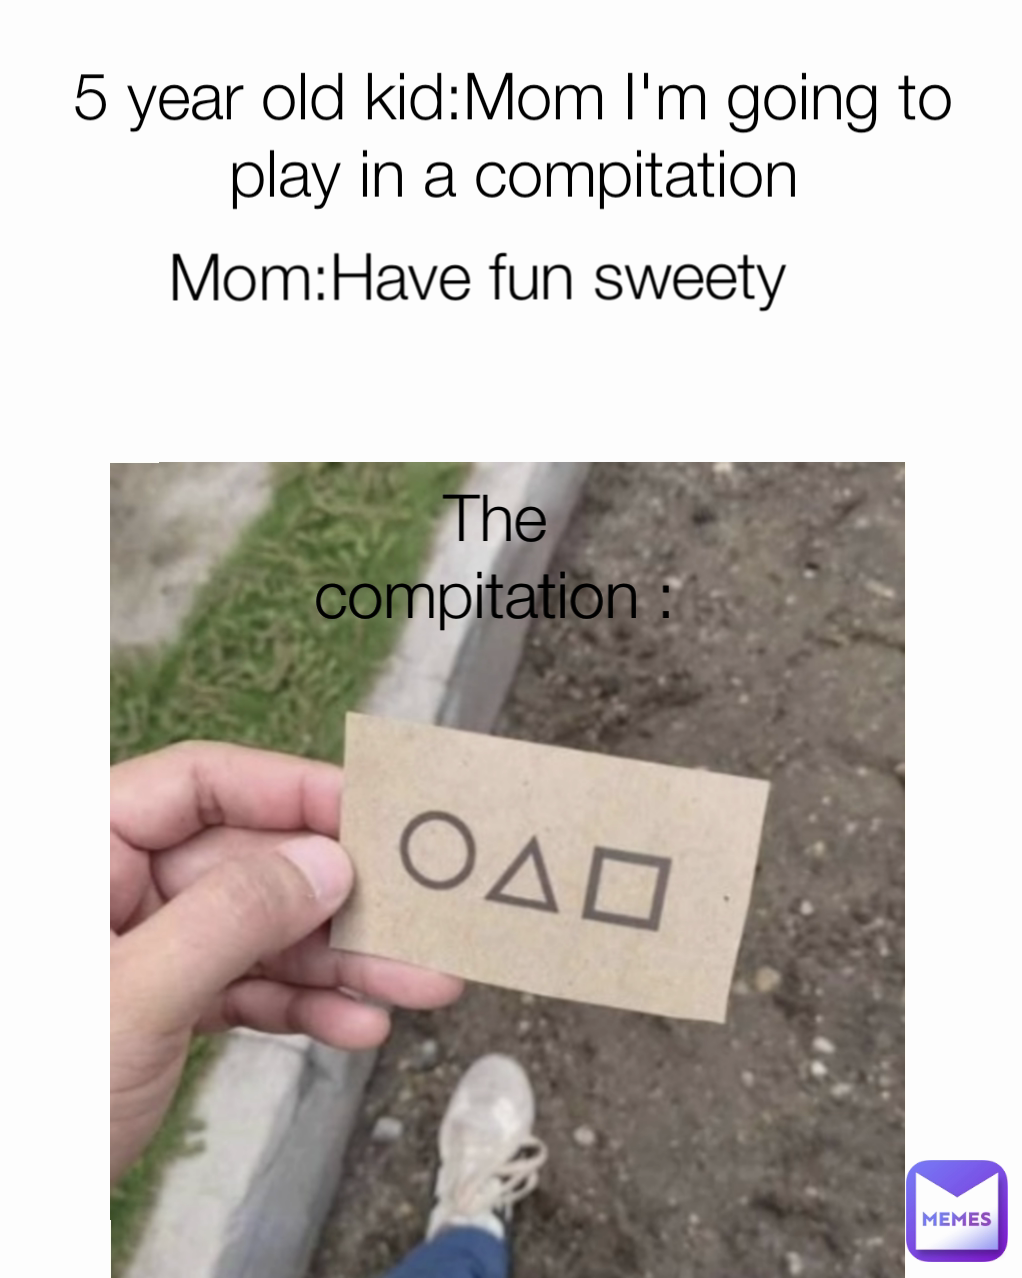 The compitation : 5 year old kid:Mom I'm going to play in a compitation

Mom:Have fun sweety!

 Mom:Have fun sweety
